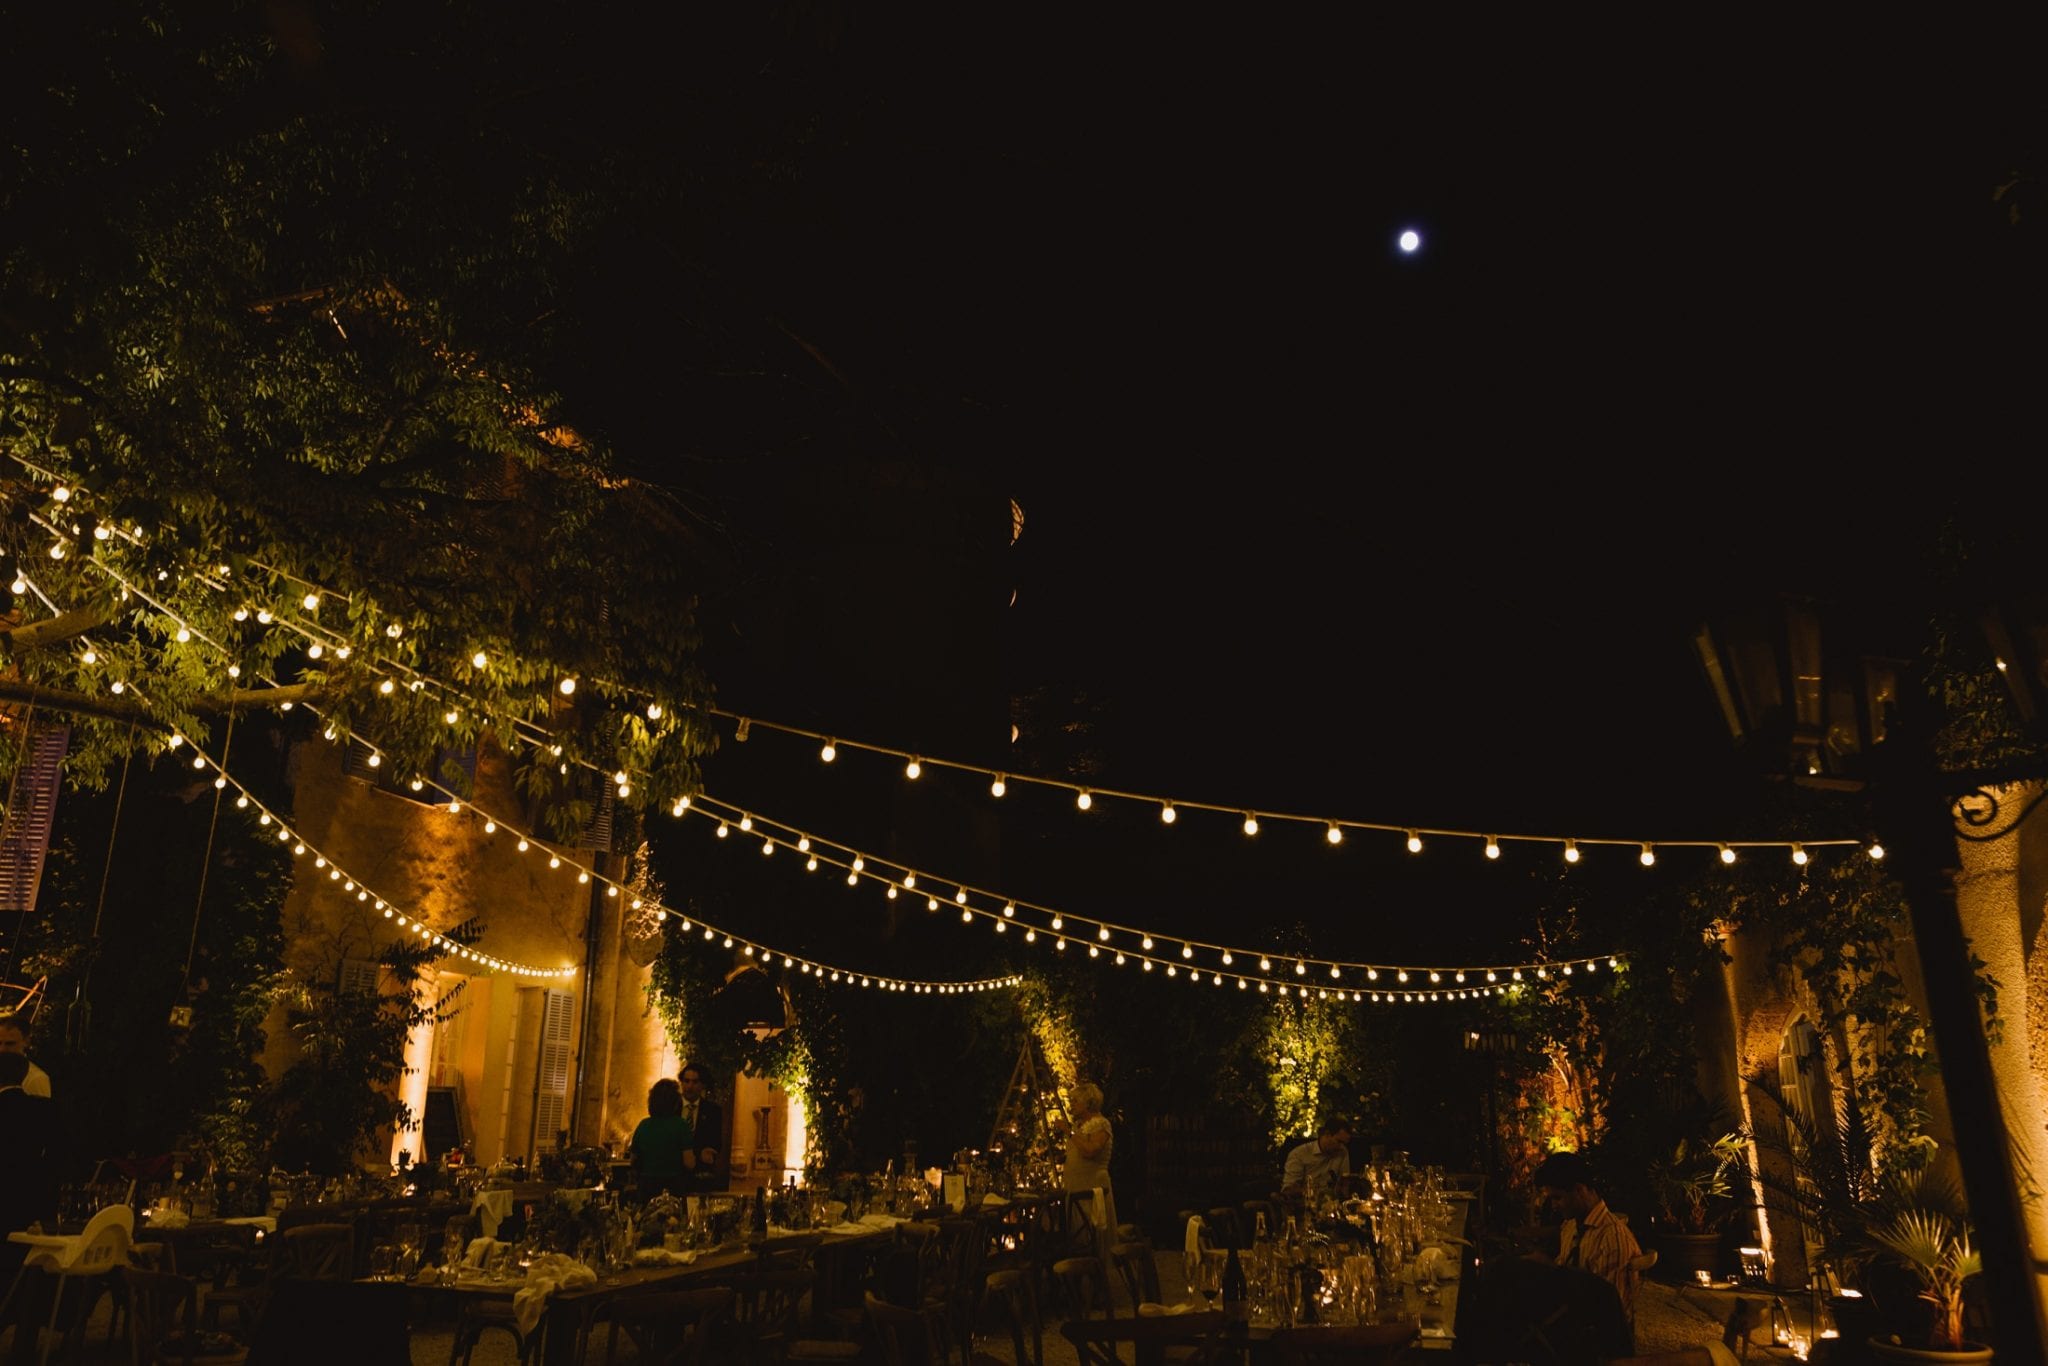 Outdoor parties at night are made prettier with lots of fairy lights